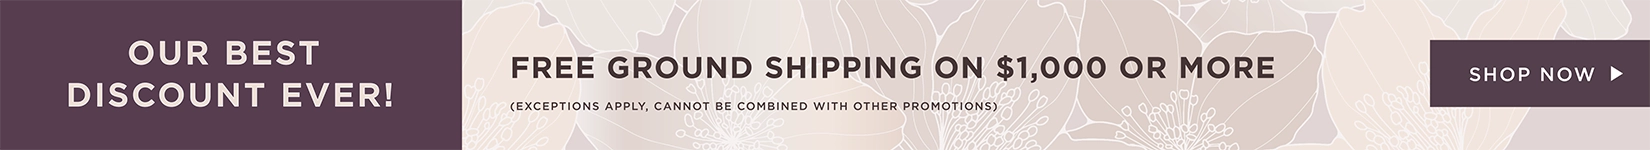 Free ground shipping on $1000 or more